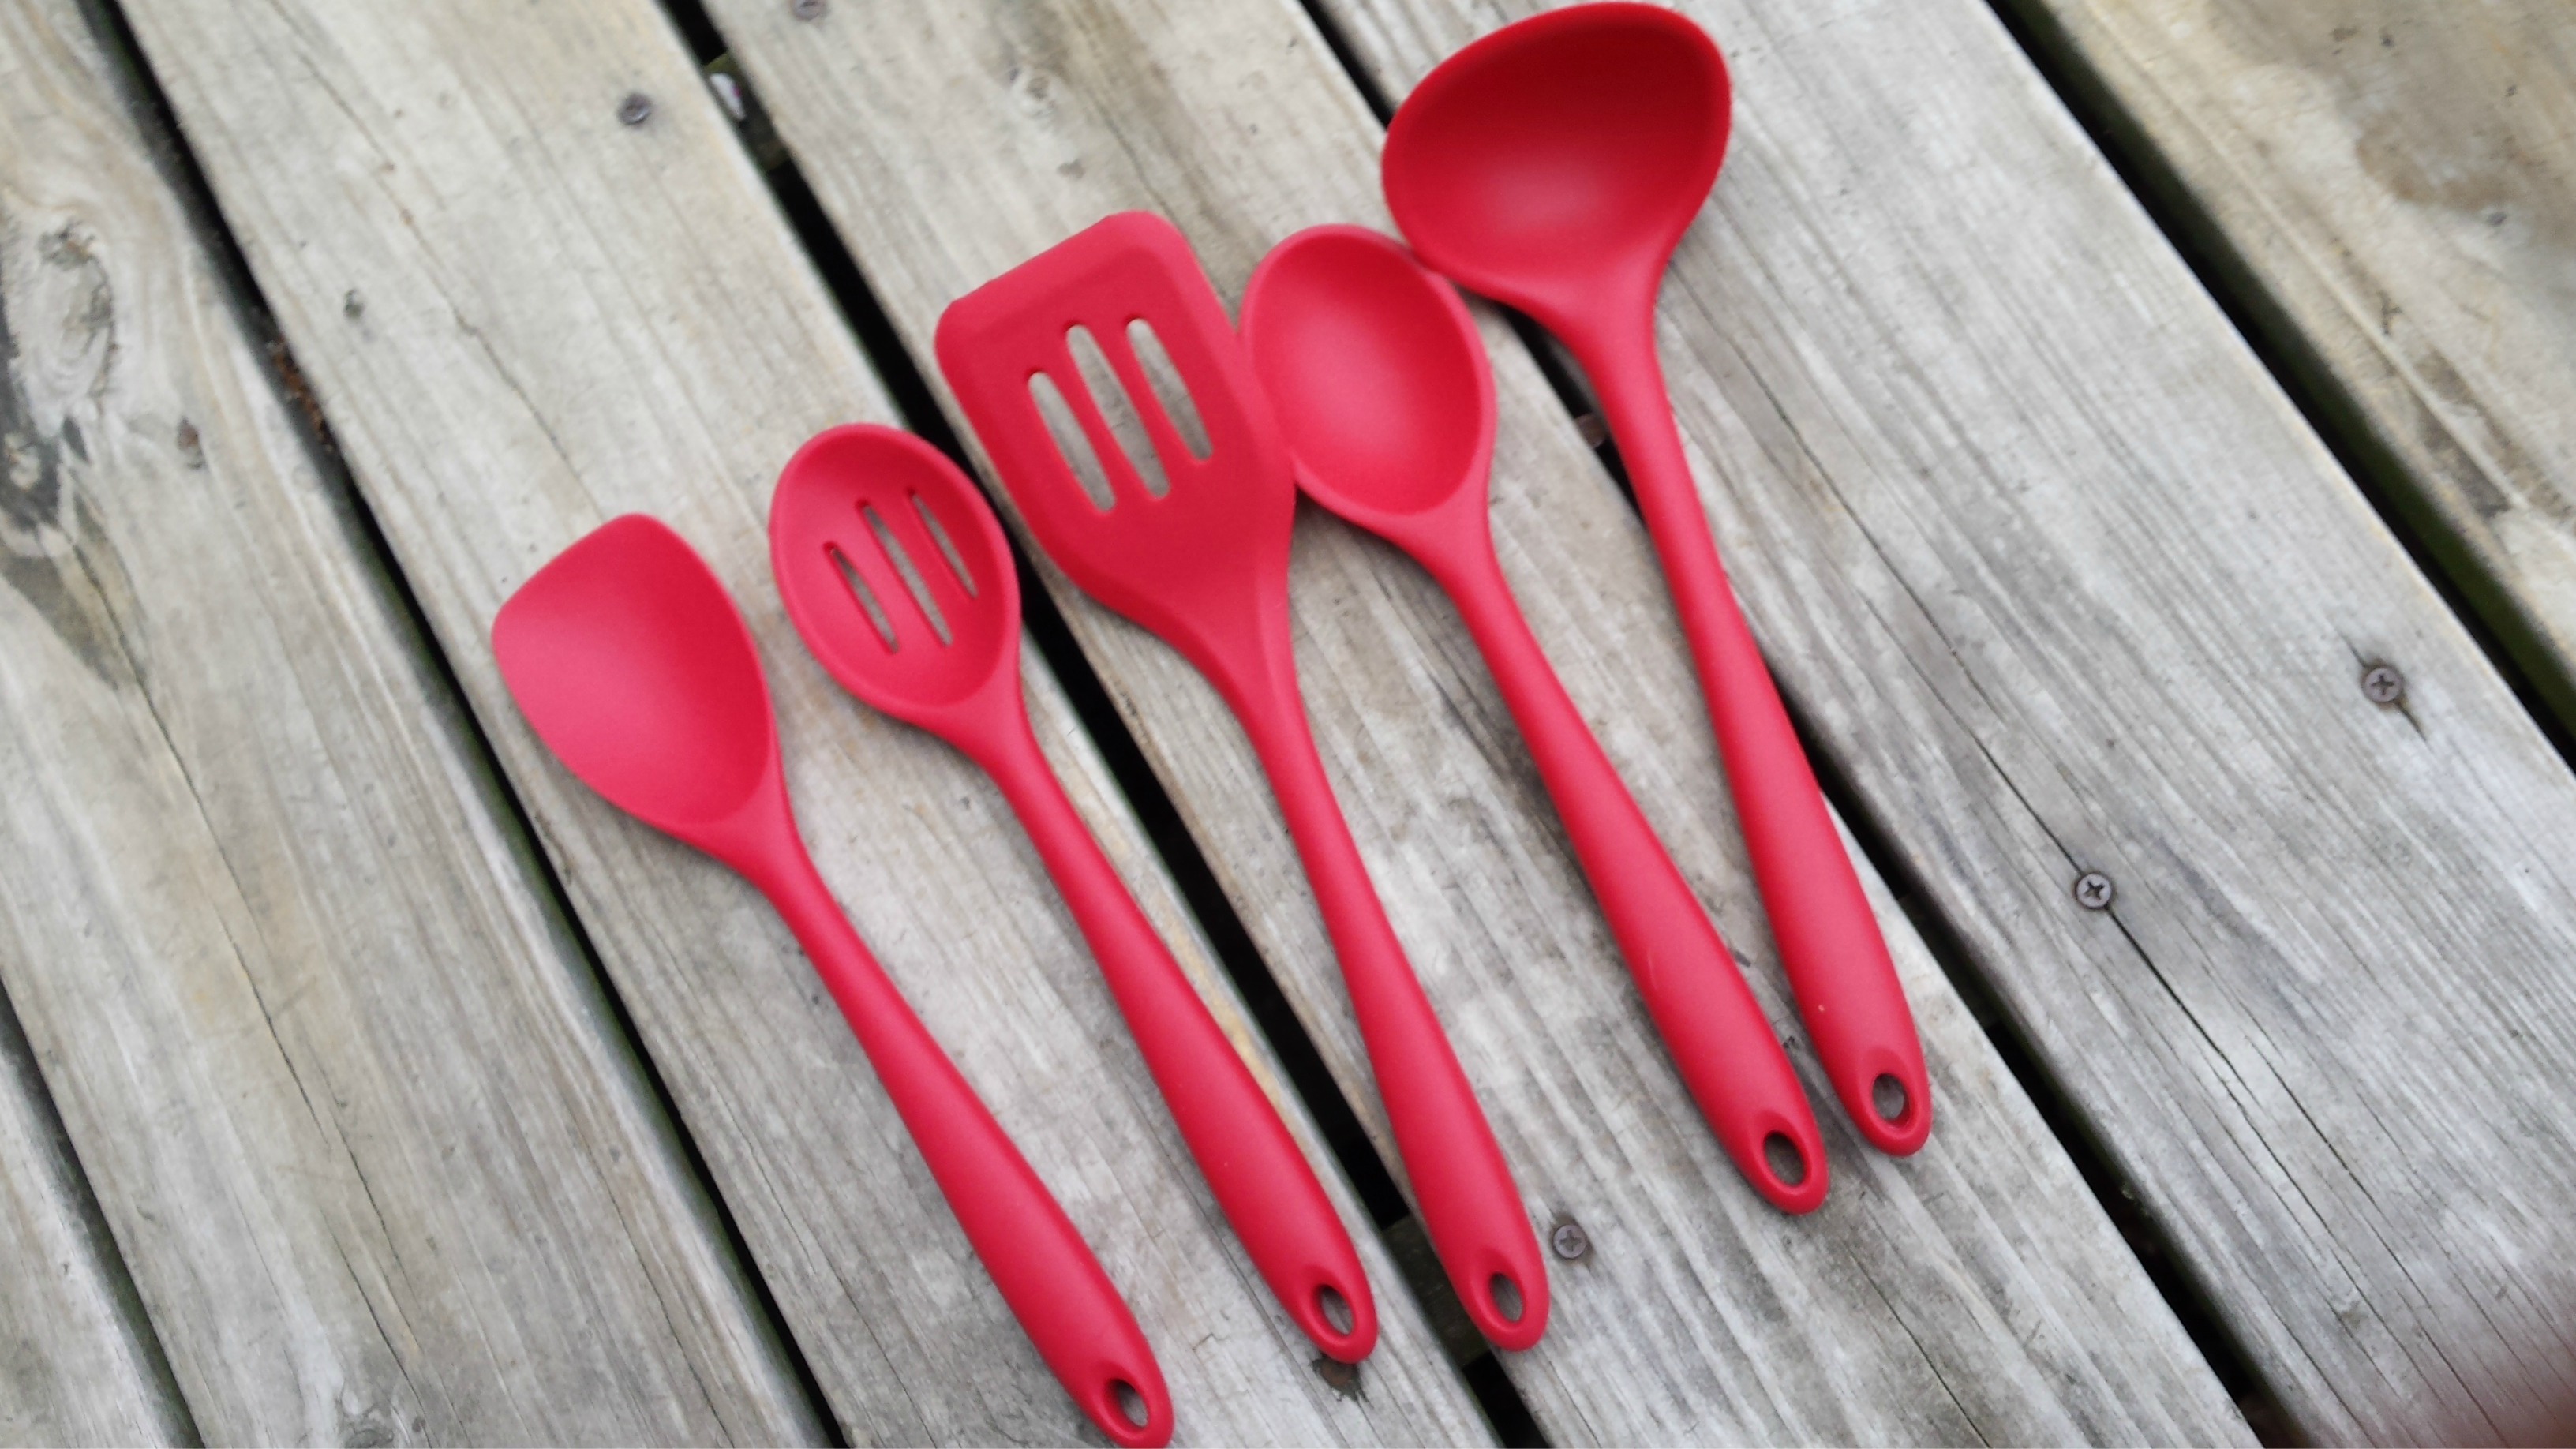 StarPack Ultimate Silicone Kitchen Utensils BB Product Reviews